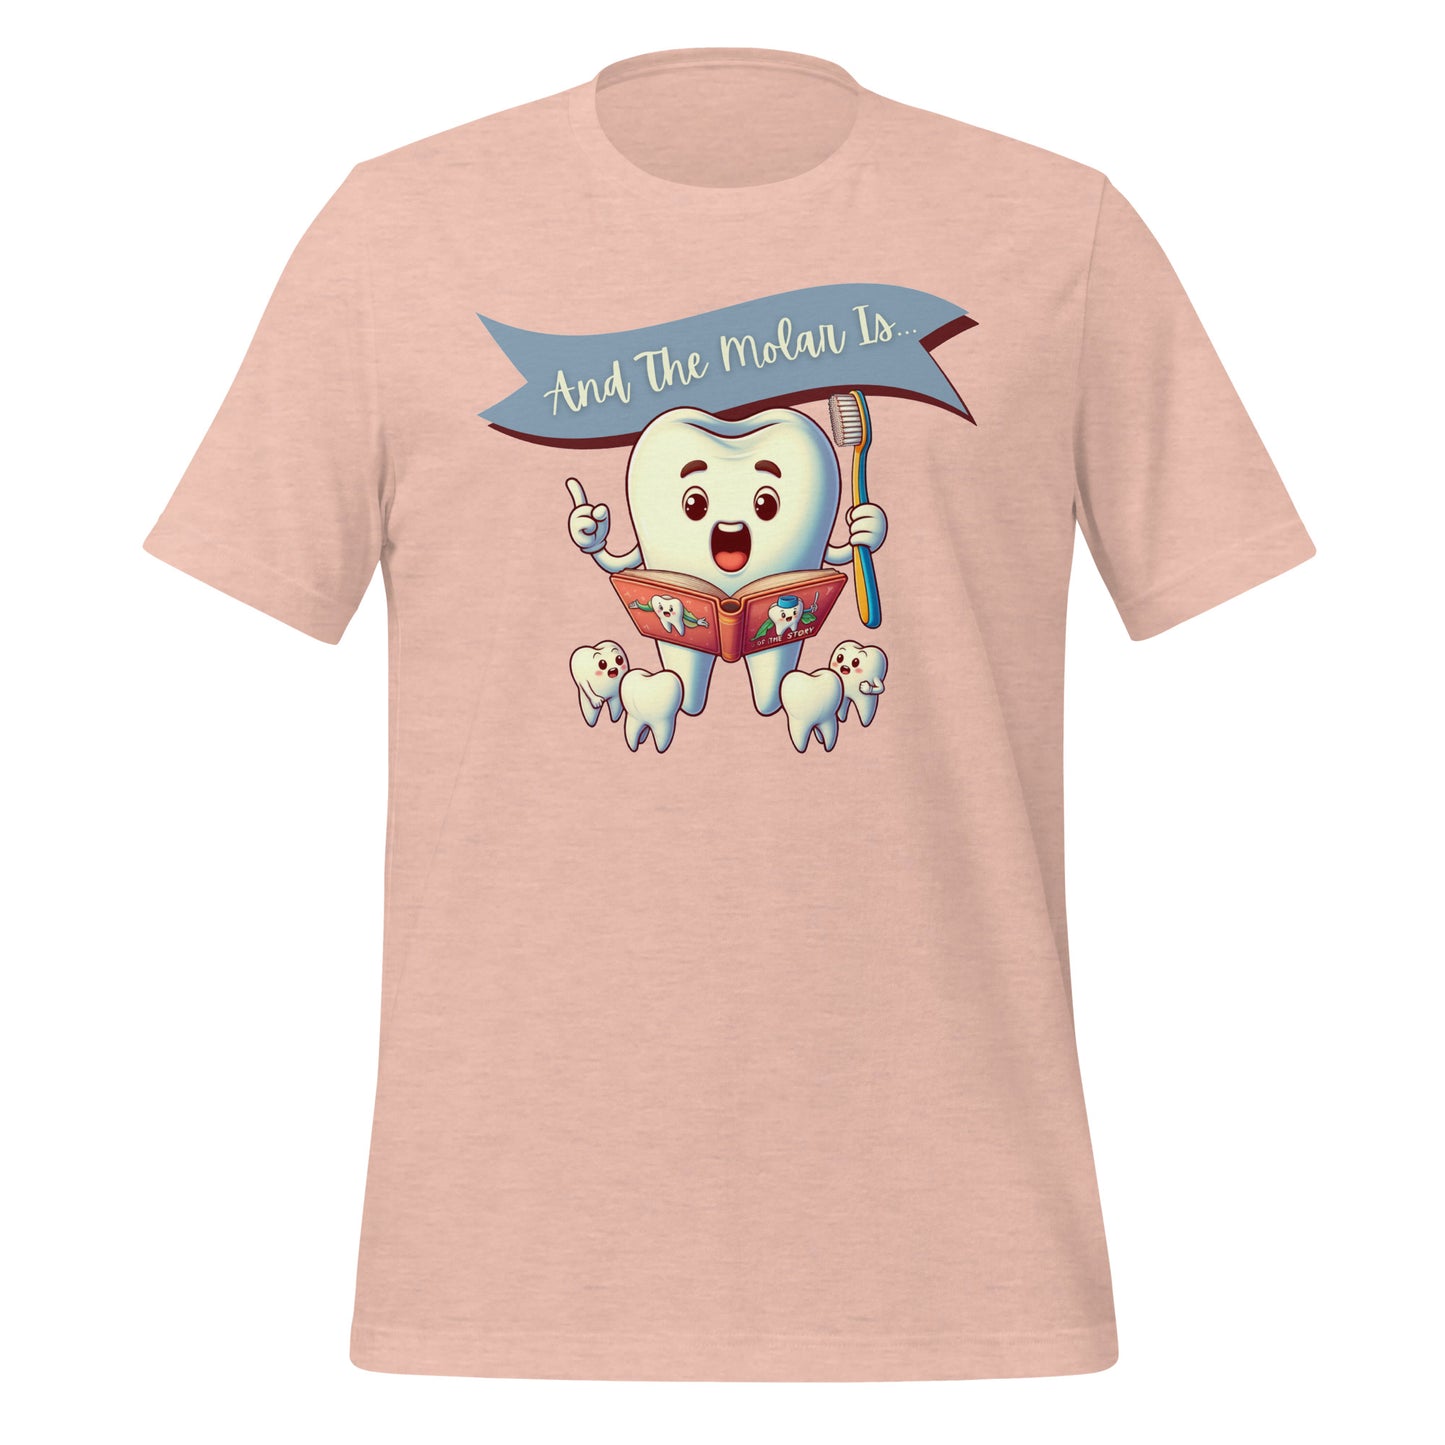 Cute dental shirt featuring a smiling tooth character reading a book with the caption ‘And The Molar Is,’ surrounded by smaller tooth characters. Heather prism peach color.